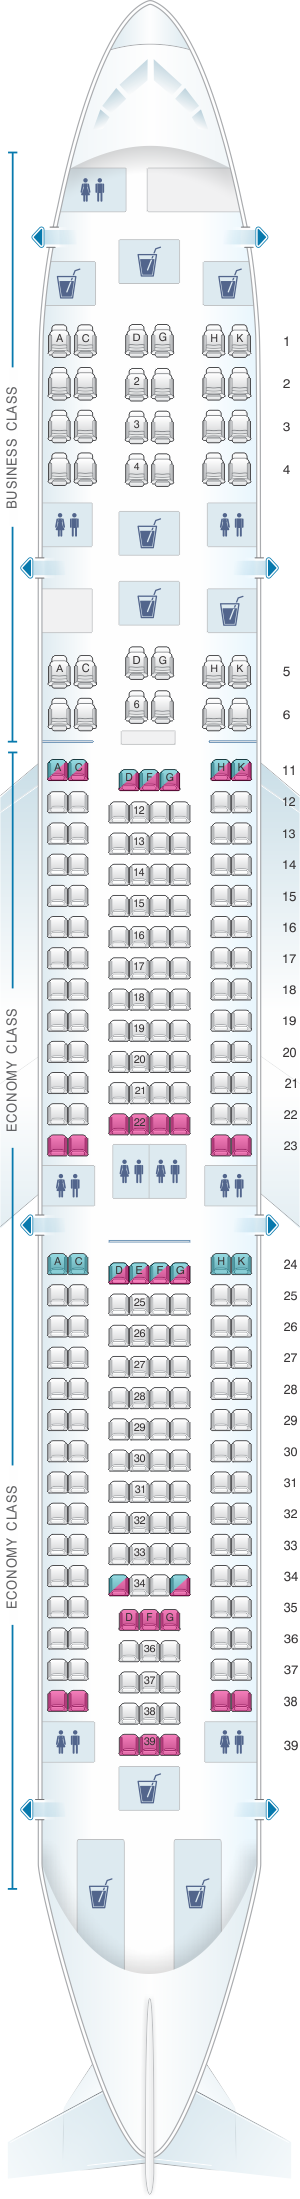 Seat map for Hi Fly Airbus A340 300 SOL 254pax